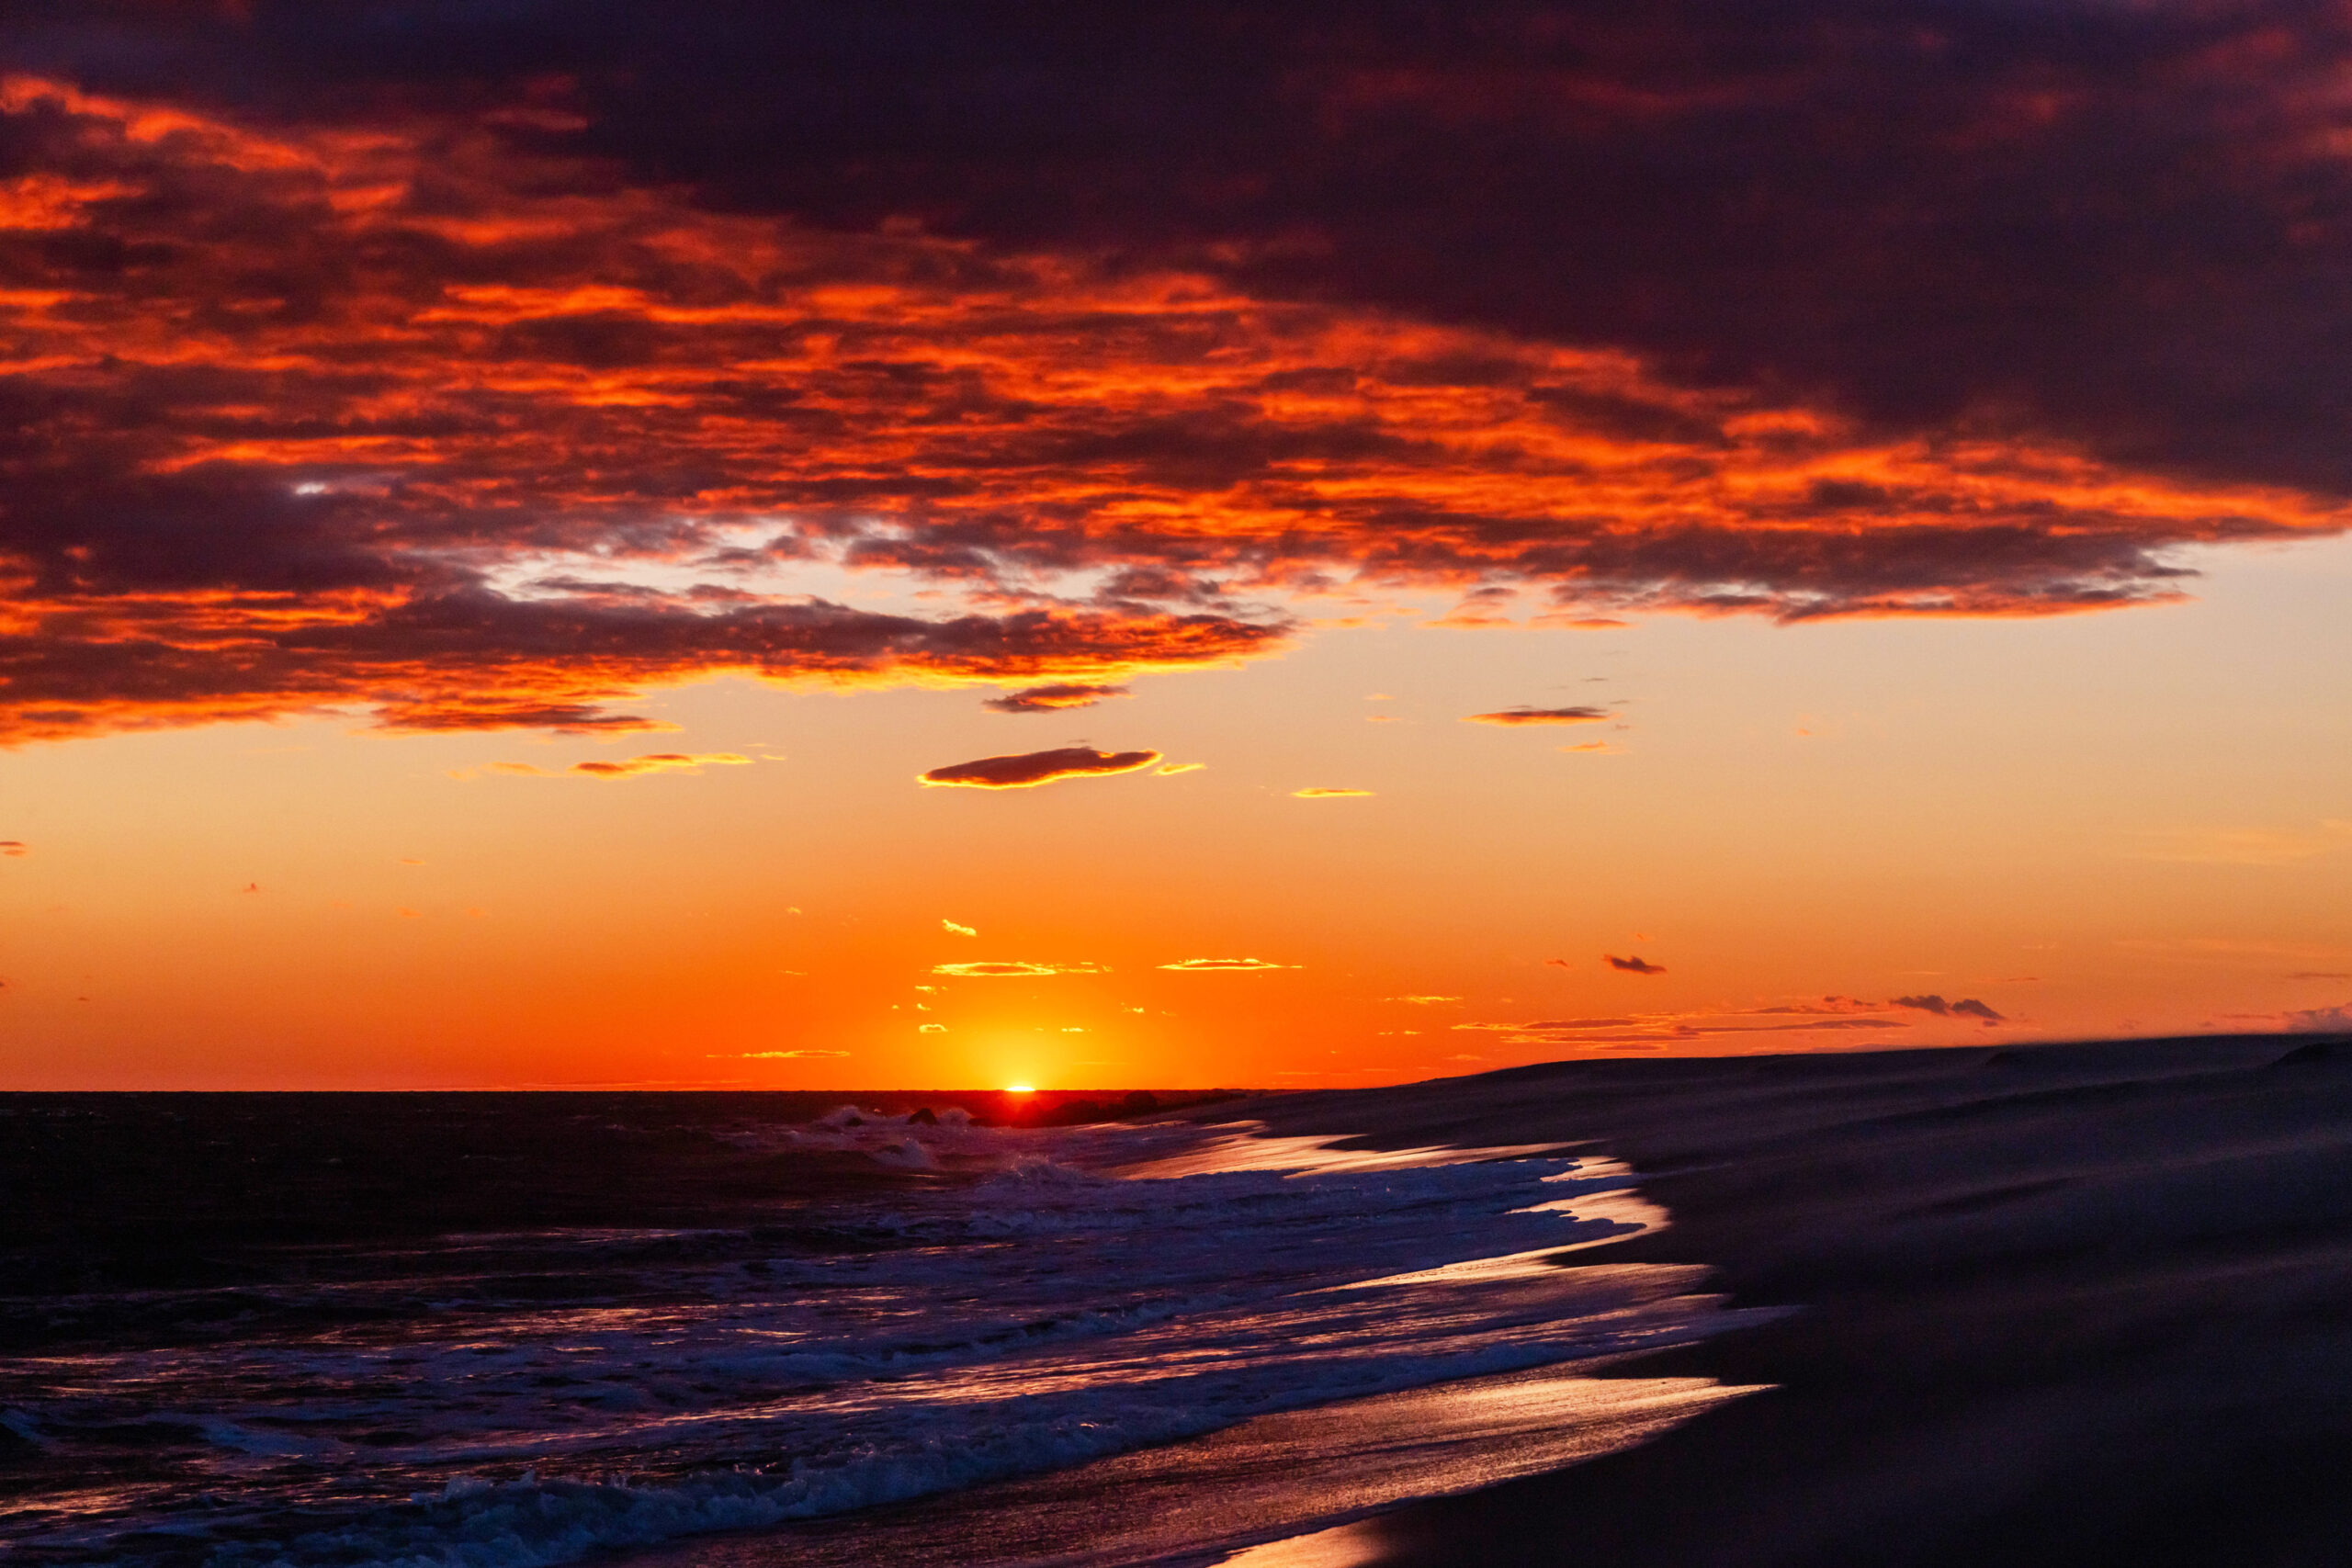 Orange and red clouds in the sky with the sun setting and the light reflected in a dark ocean and the sand